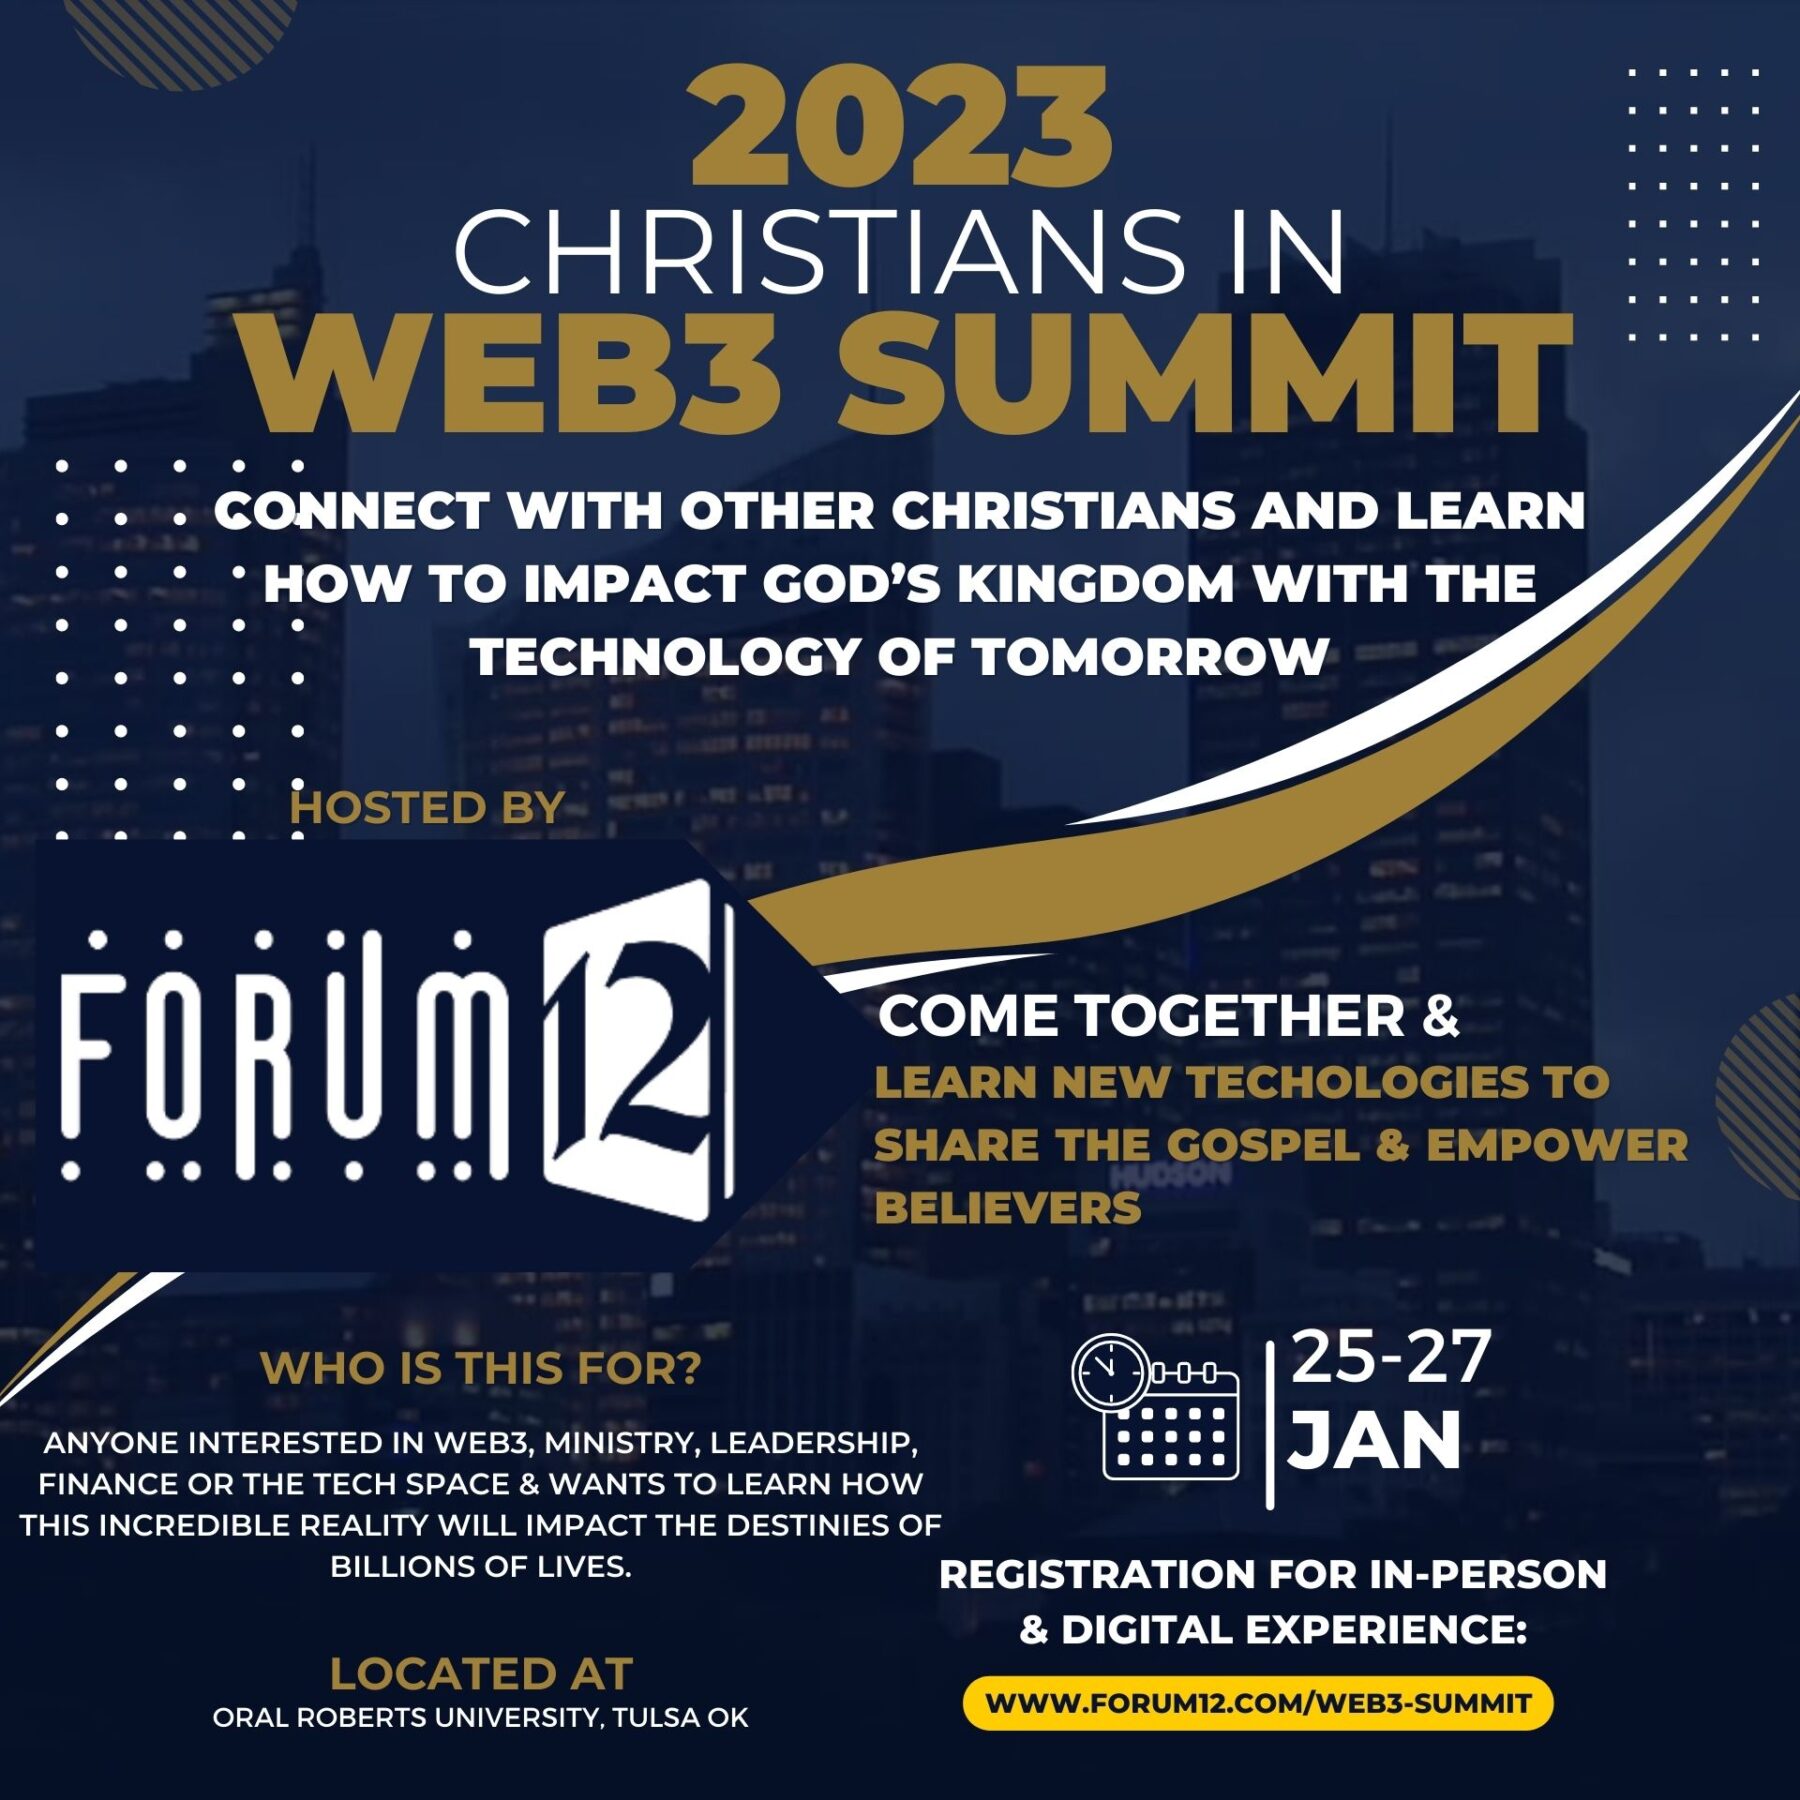 christians-in-web3-summit-learn-how-to-use-crypto-nfts-and-amp-blockchain-to-build-the-kingdom-of-jesus-christ